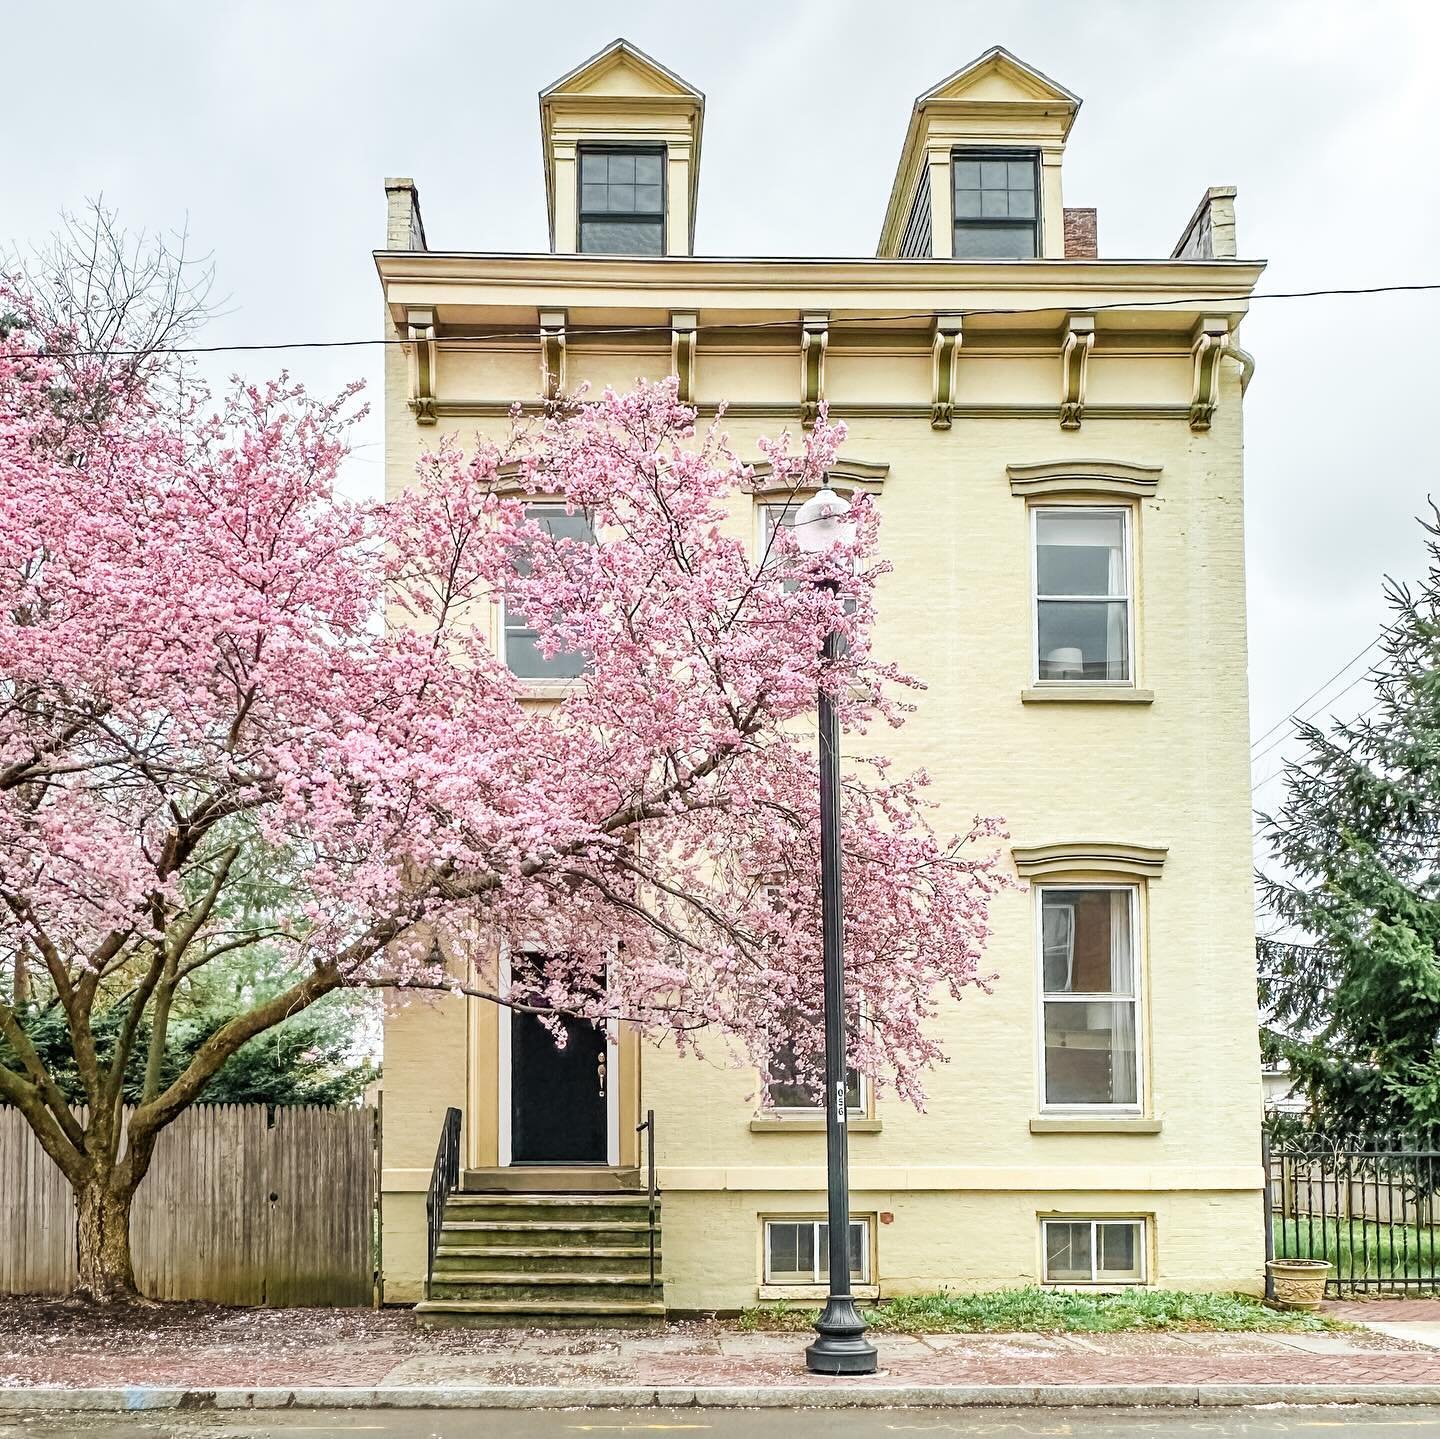 Pink and yellow may be my new favorite color combo. 🌸🏠
.
#househunting #troyny #troyrealestate #gablerrealty #historichouse #spring #cherryblossom #brownstone #ciyliving #housetour